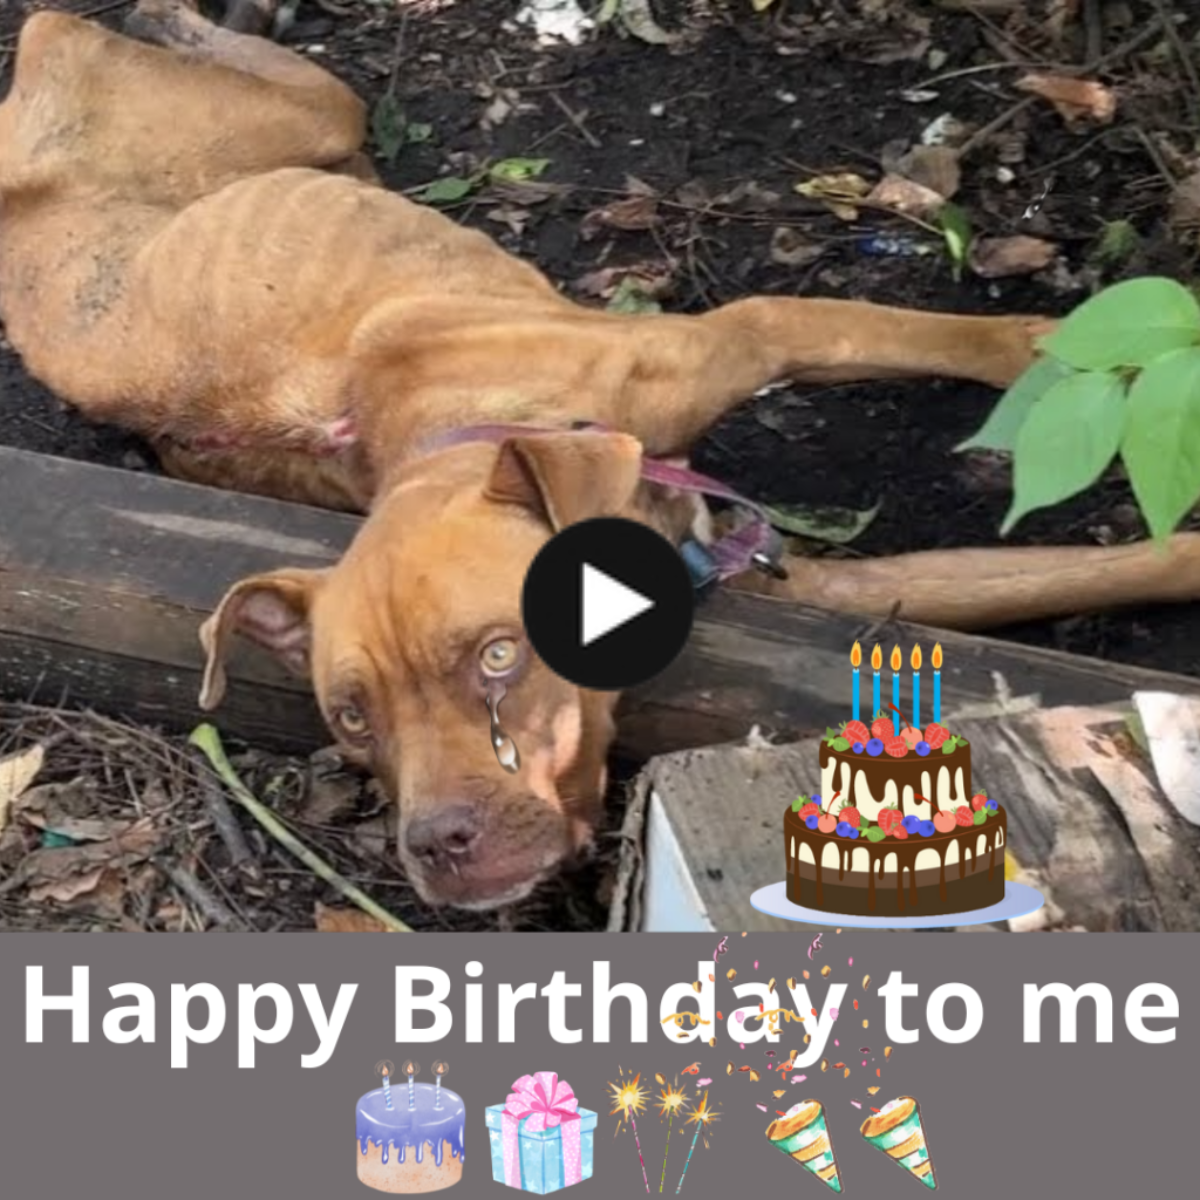 Recalling a Forgotten Soul: Celebrating the Birthday of a Dog Discovered Submerged in Water and Garbage